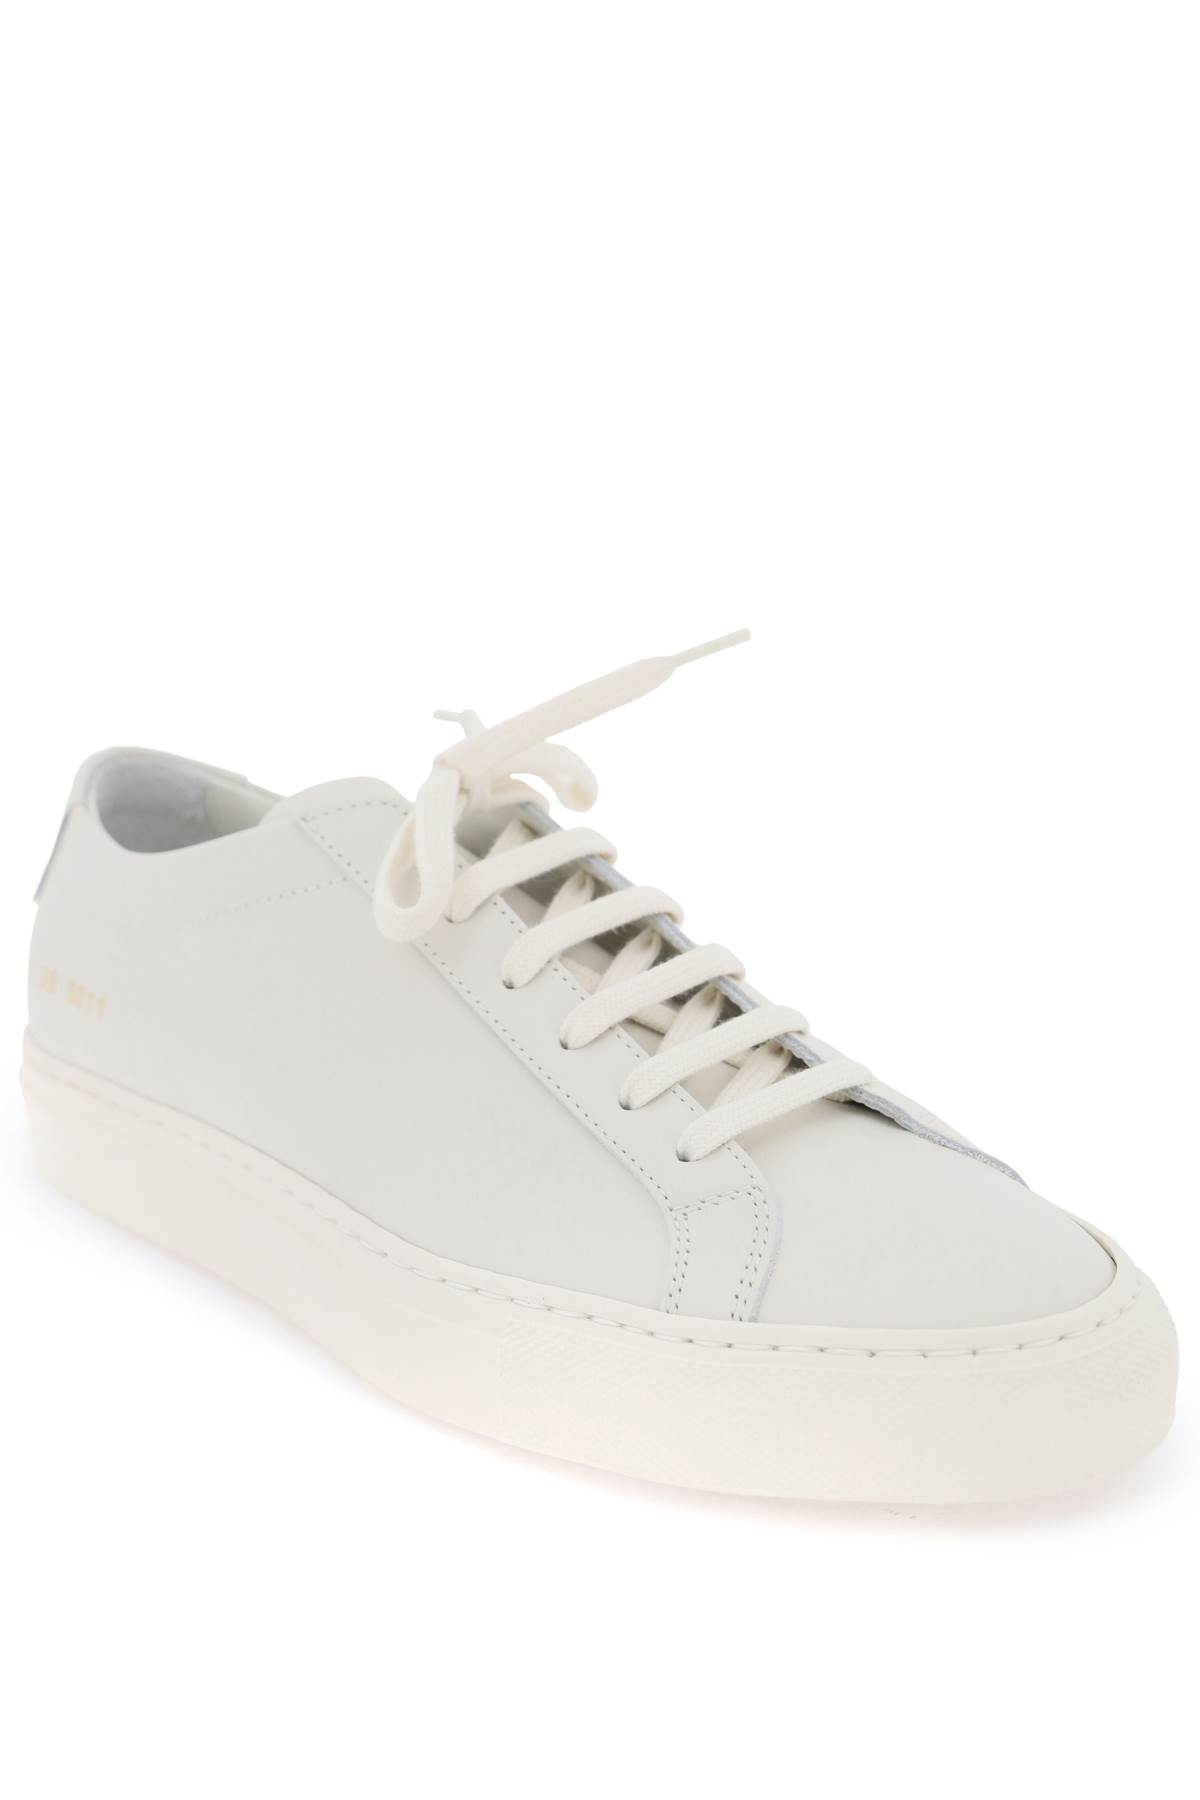 Shop Common Projects Original Achilles Leather Sneakers In Warm White (white)